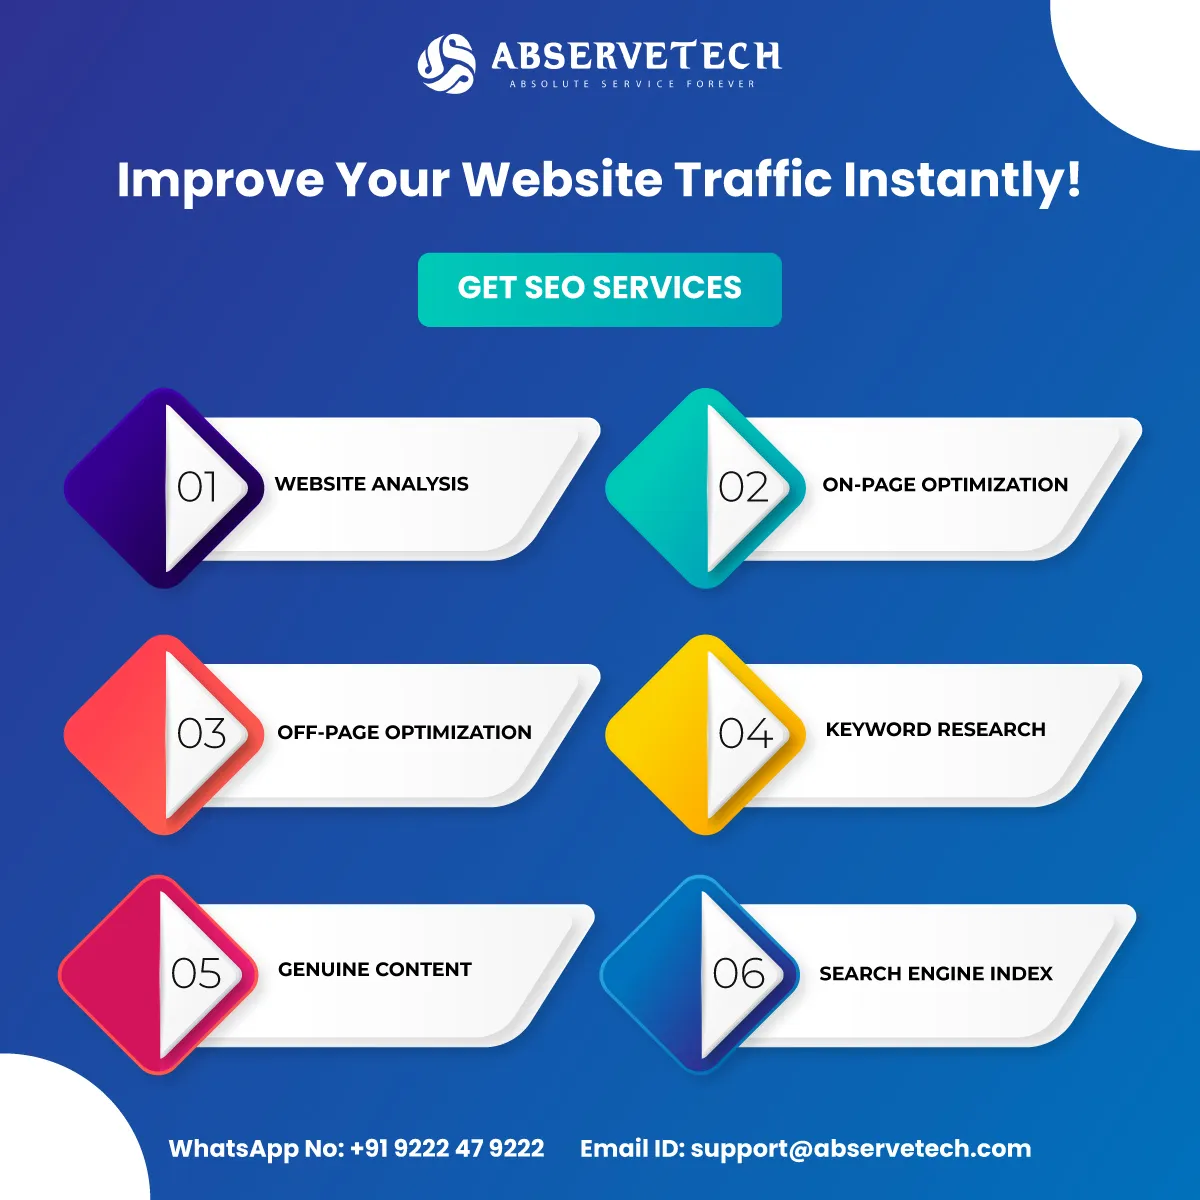 Improve Your Website Traffic Instantly